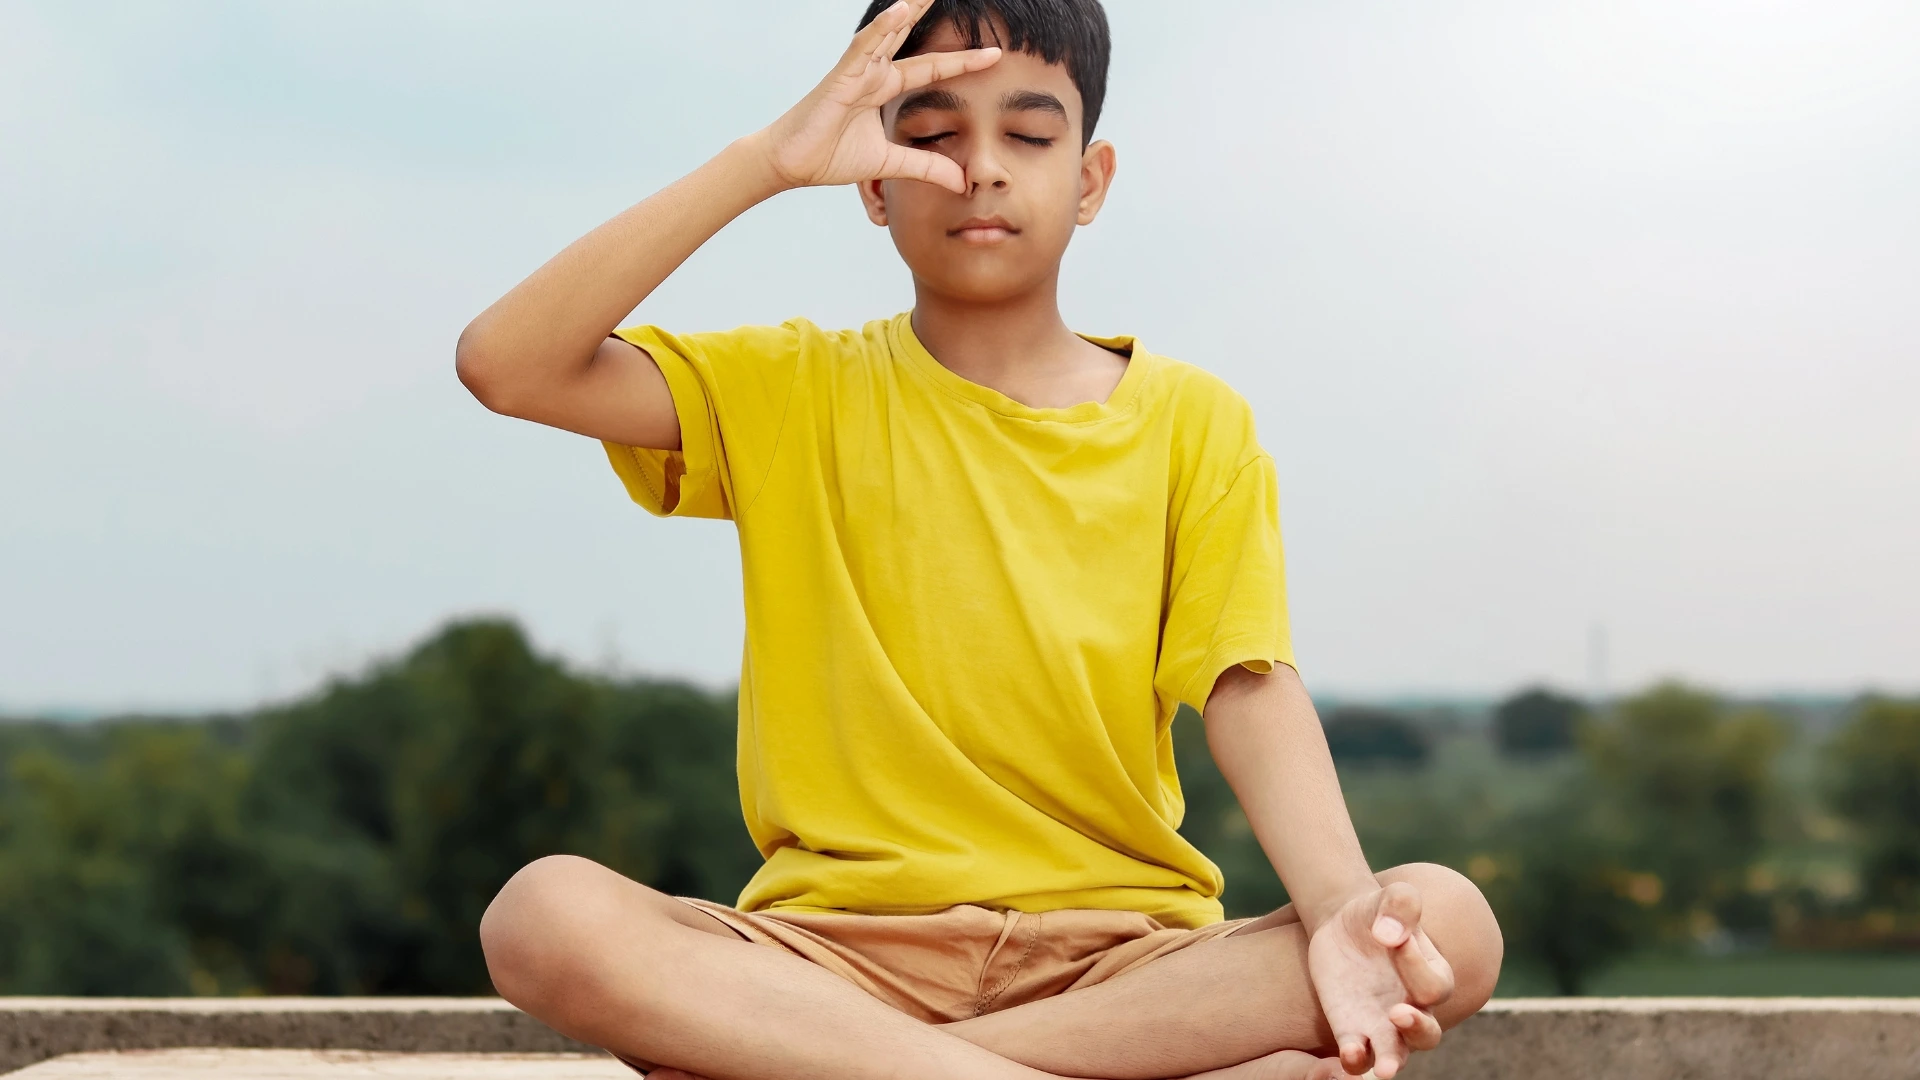 How Does Kids Yoga Support the Mental Health of Children?